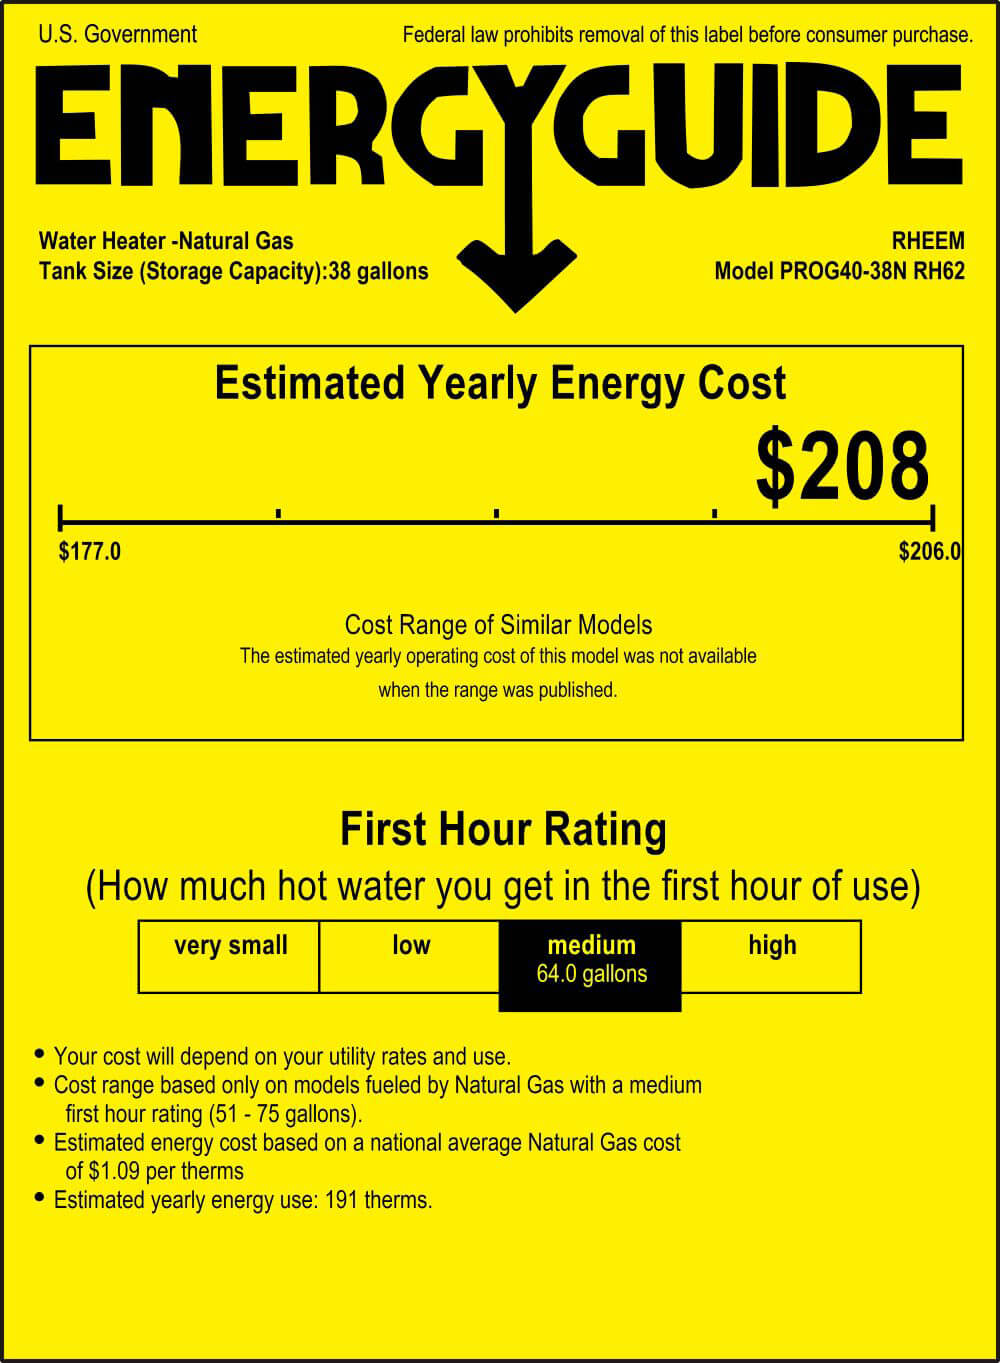 energy guide estimated yearly energy cost $208